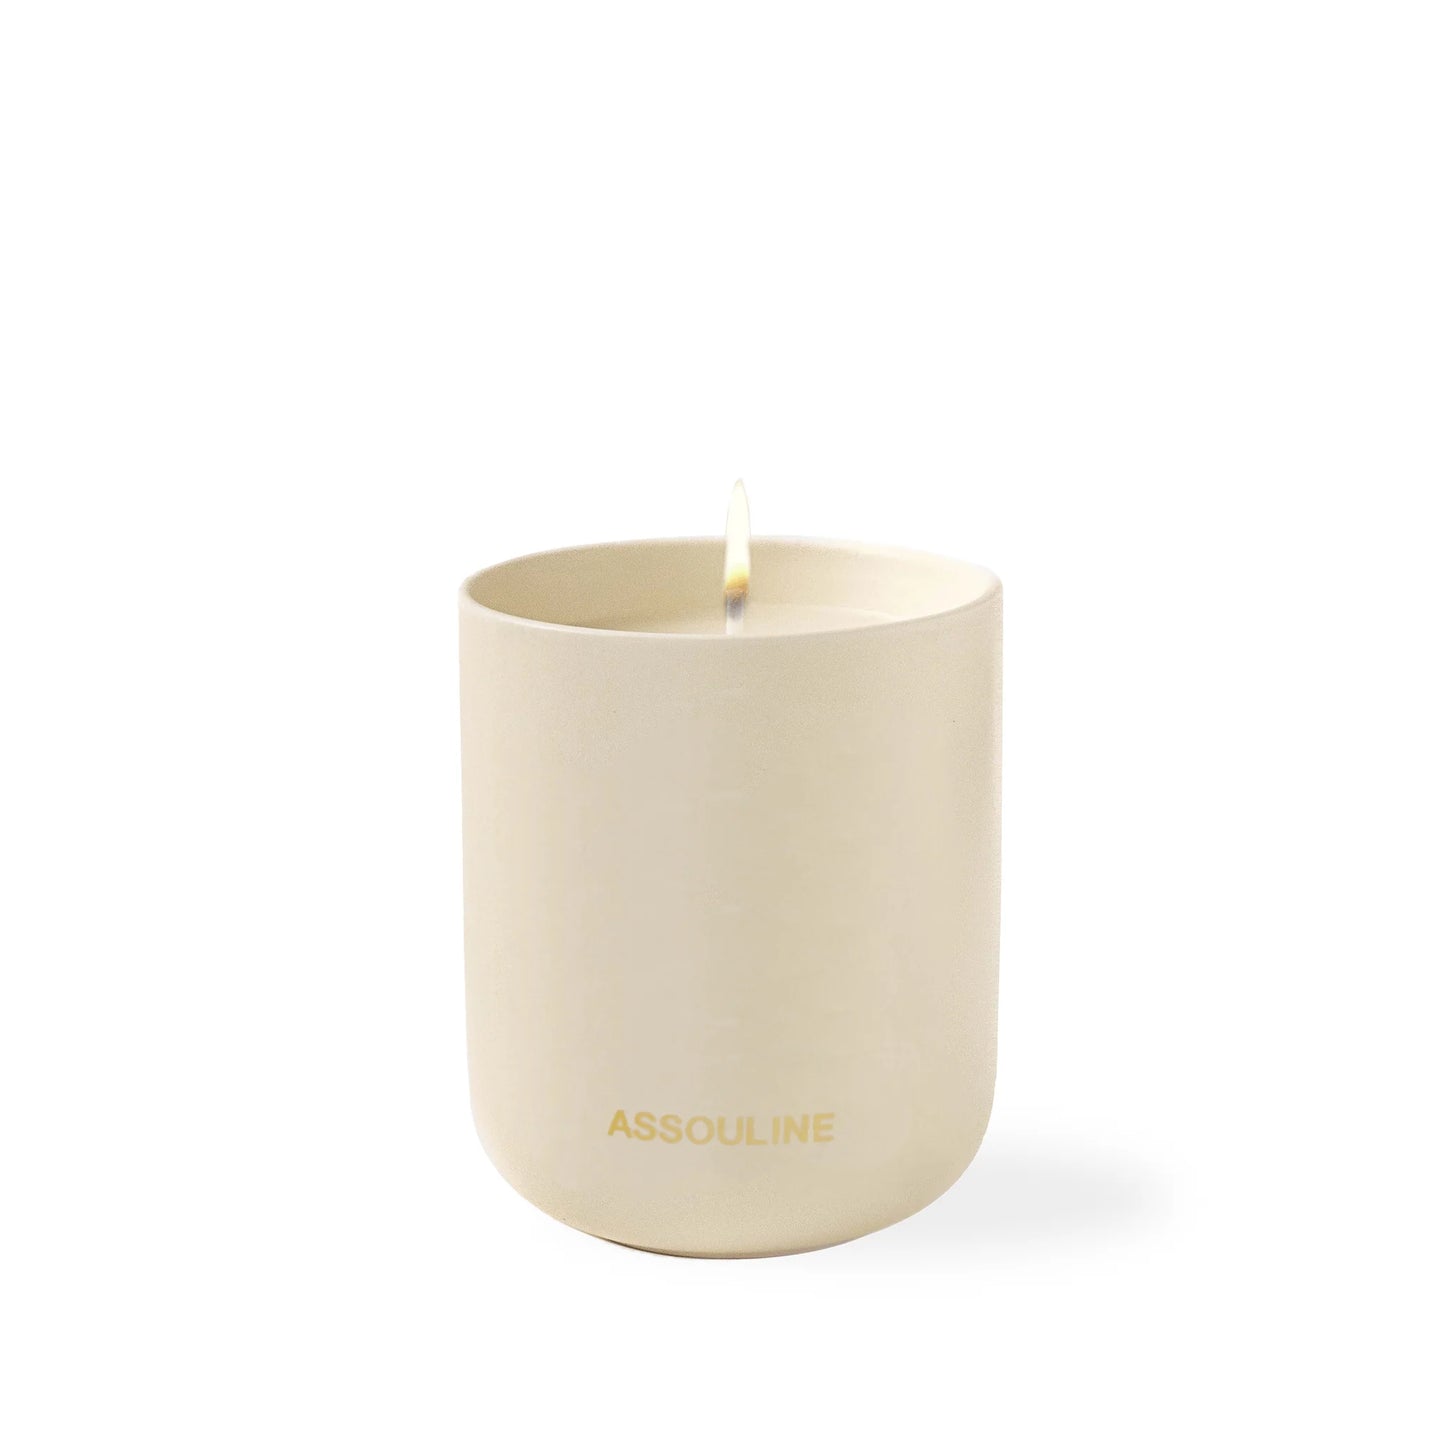 Mykonos Muse Candle - Travel from Home - Assouline